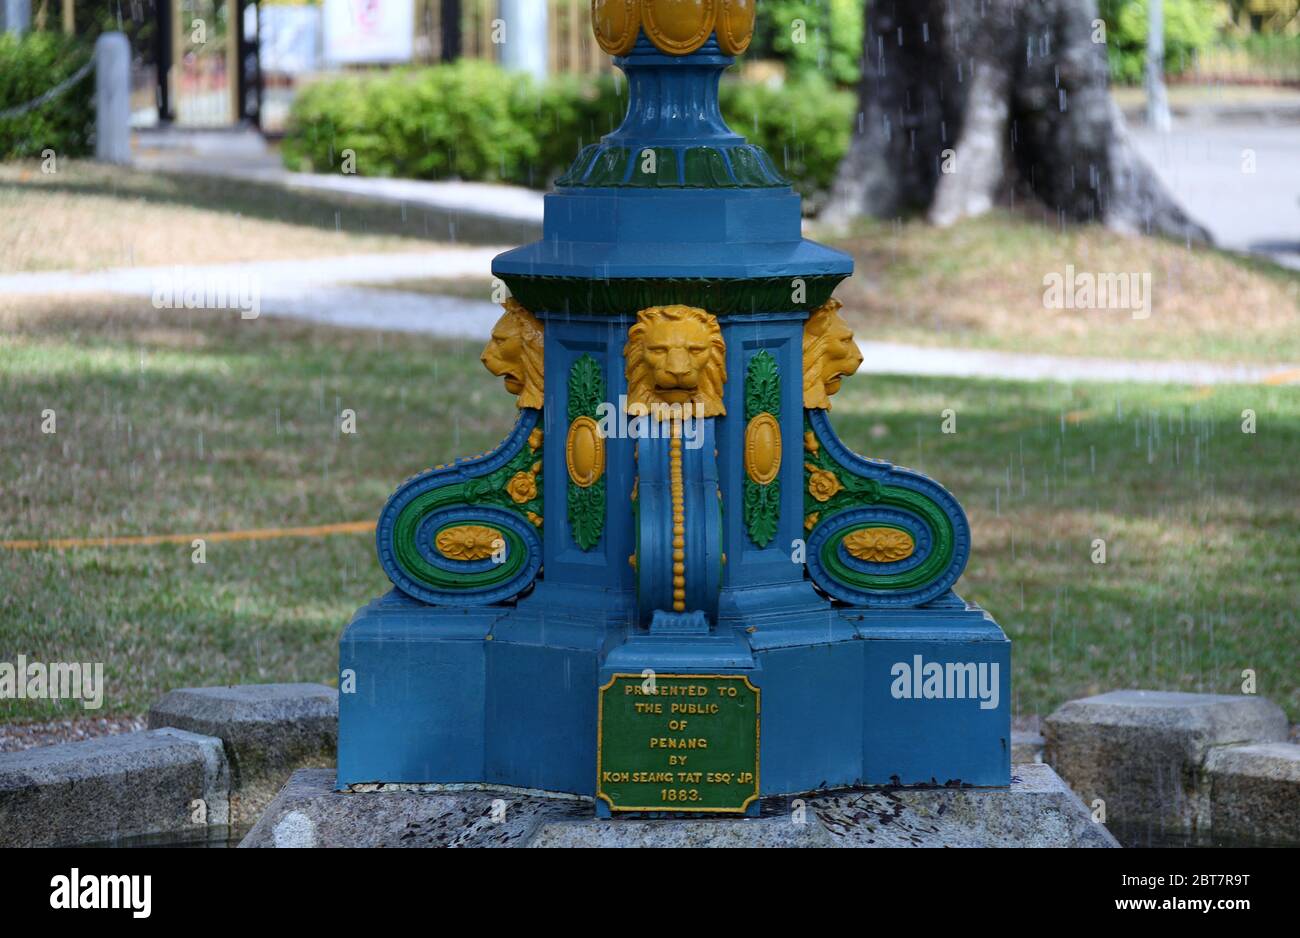 Koh Seang Tat memorial water fountain from 1883 on Light Street next to the Town Hall  in George Town Stock Photo